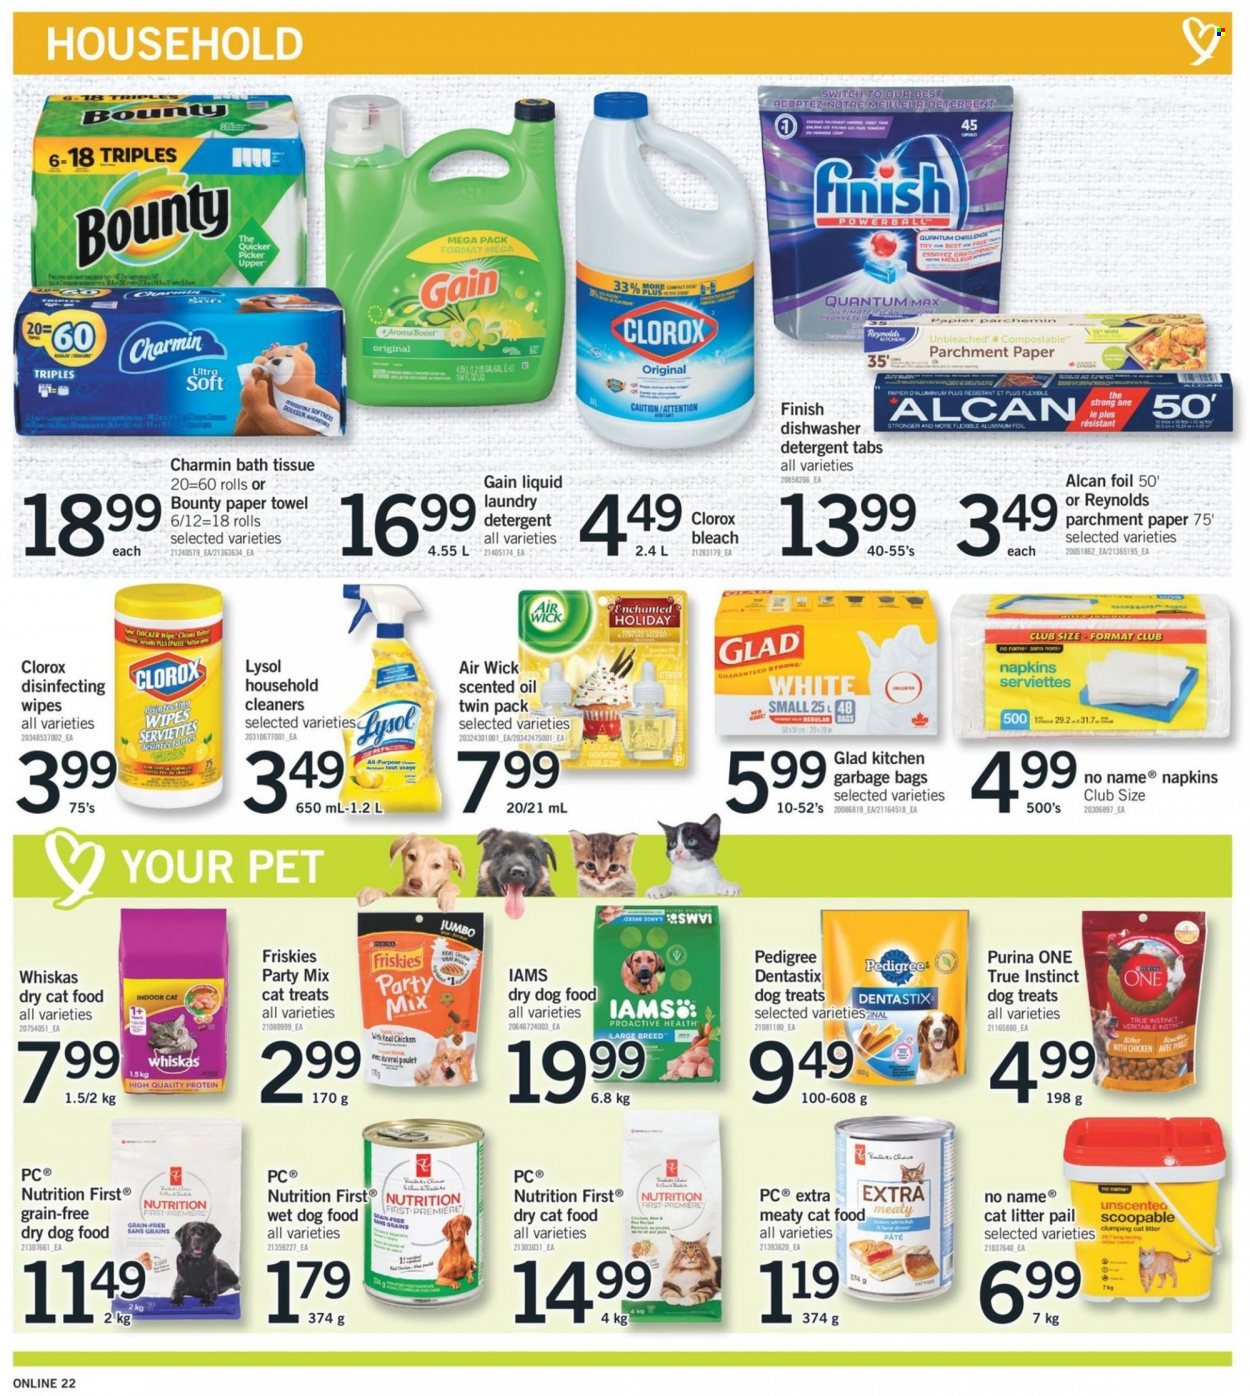 thumbnail - Fortinos Flyer - January 20, 2022 - January 26, 2022 - Sales products - No Name, Bounty, switch, Boost, wipes, napkins, bath tissue, paper towels, Charmin, Gain, bleach, Lysol, Clorox, laundry detergent, aluminium foil, Air Wick, scented oil, cat litter, PREMIERE, animal food, cat food, dog food, wet dog food, Purina, Dentastix, Pedigree, dry dog food, dry cat food, Friskies, Iams, detergent, Whiskas. Page 23.